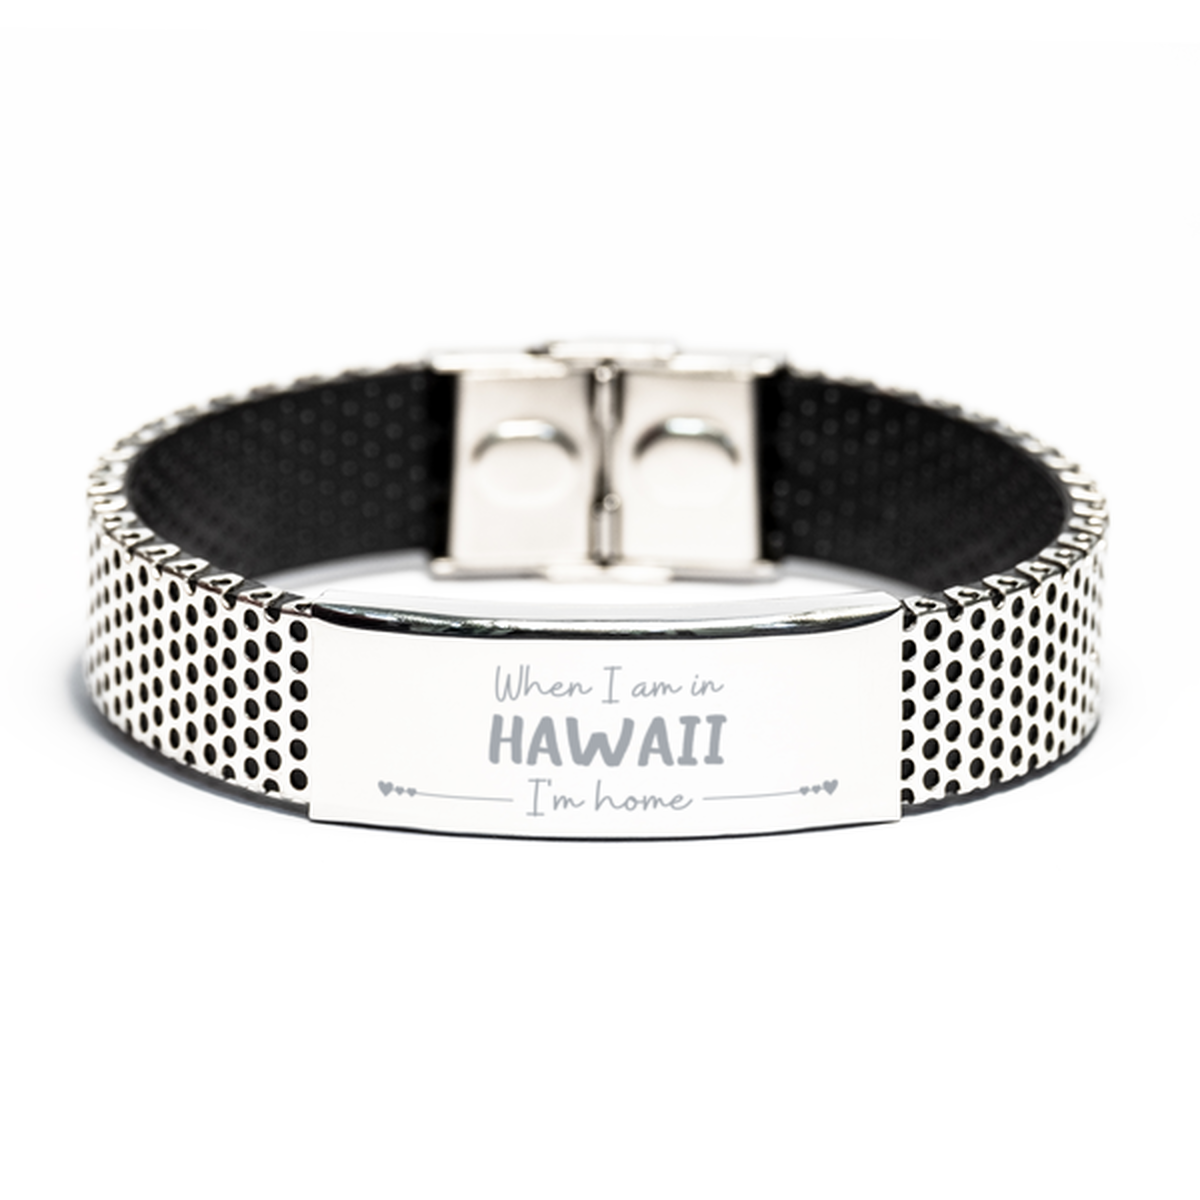 When I am in Hawaii I'm home Stainless Steel Bracelet, Cheap Gifts For Hawaii, State Hawaii Birthday Gifts for Friends Coworker